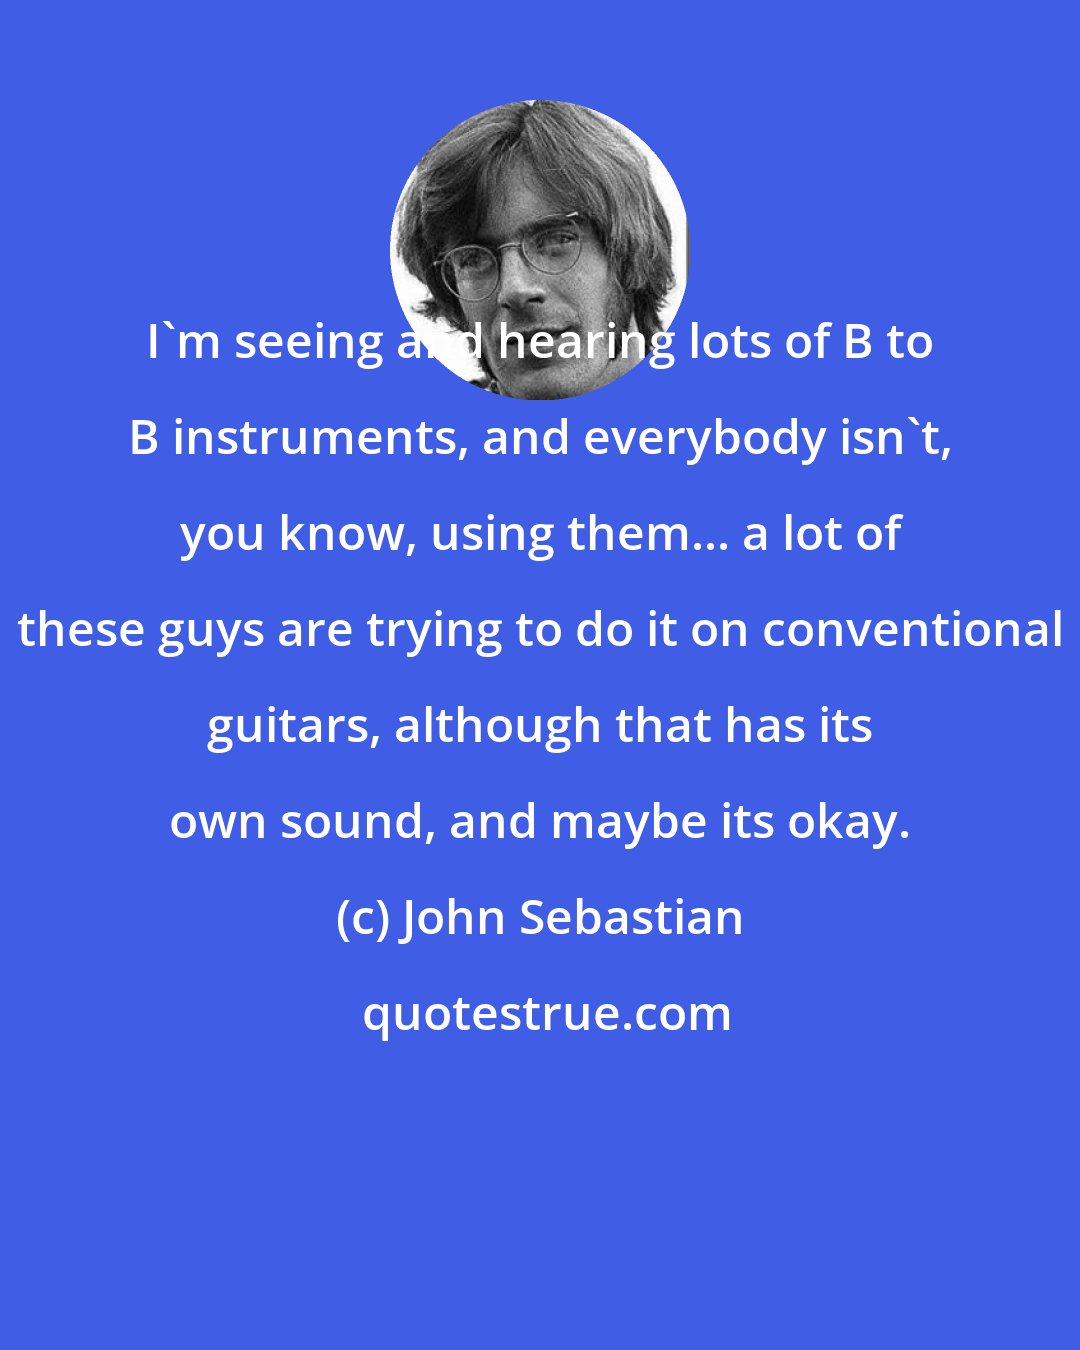 John Sebastian: I'm seeing and hearing lots of B to B instruments, and everybody isn't, you know, using them... a lot of these guys are trying to do it on conventional guitars, although that has its own sound, and maybe its okay.